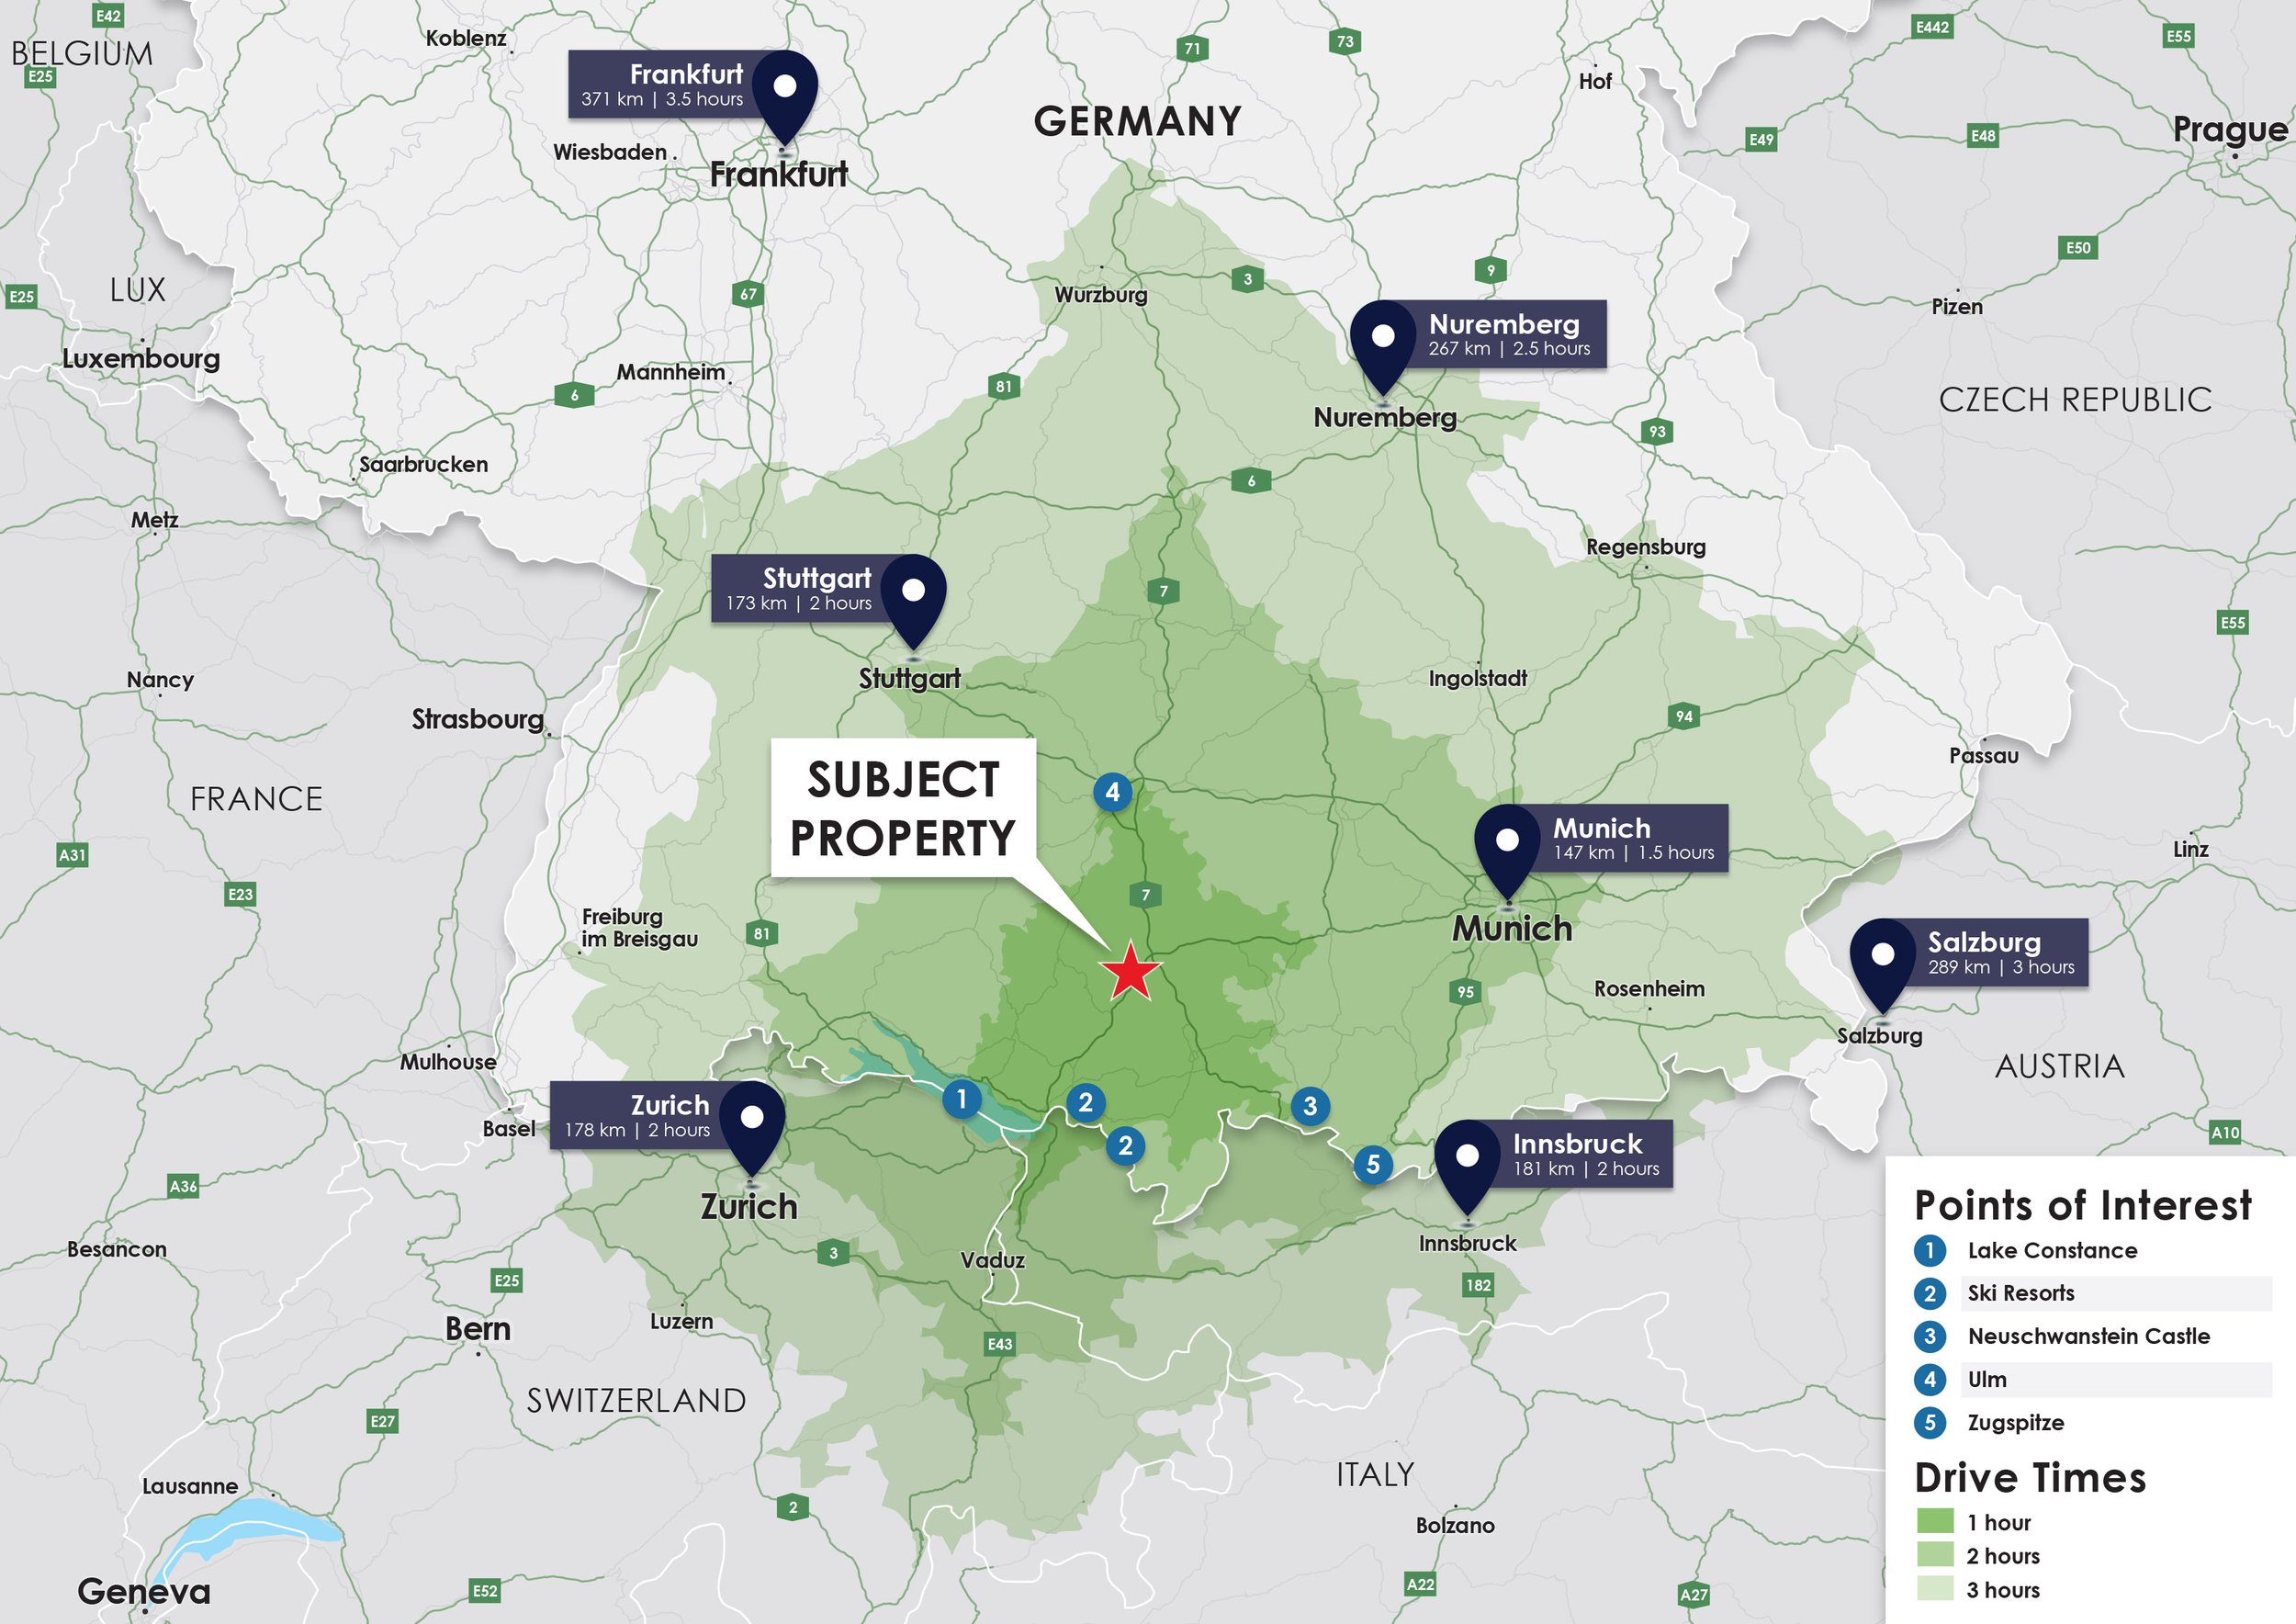 Germany Regional Drive Times Points of Interest Attractions Map.jpg